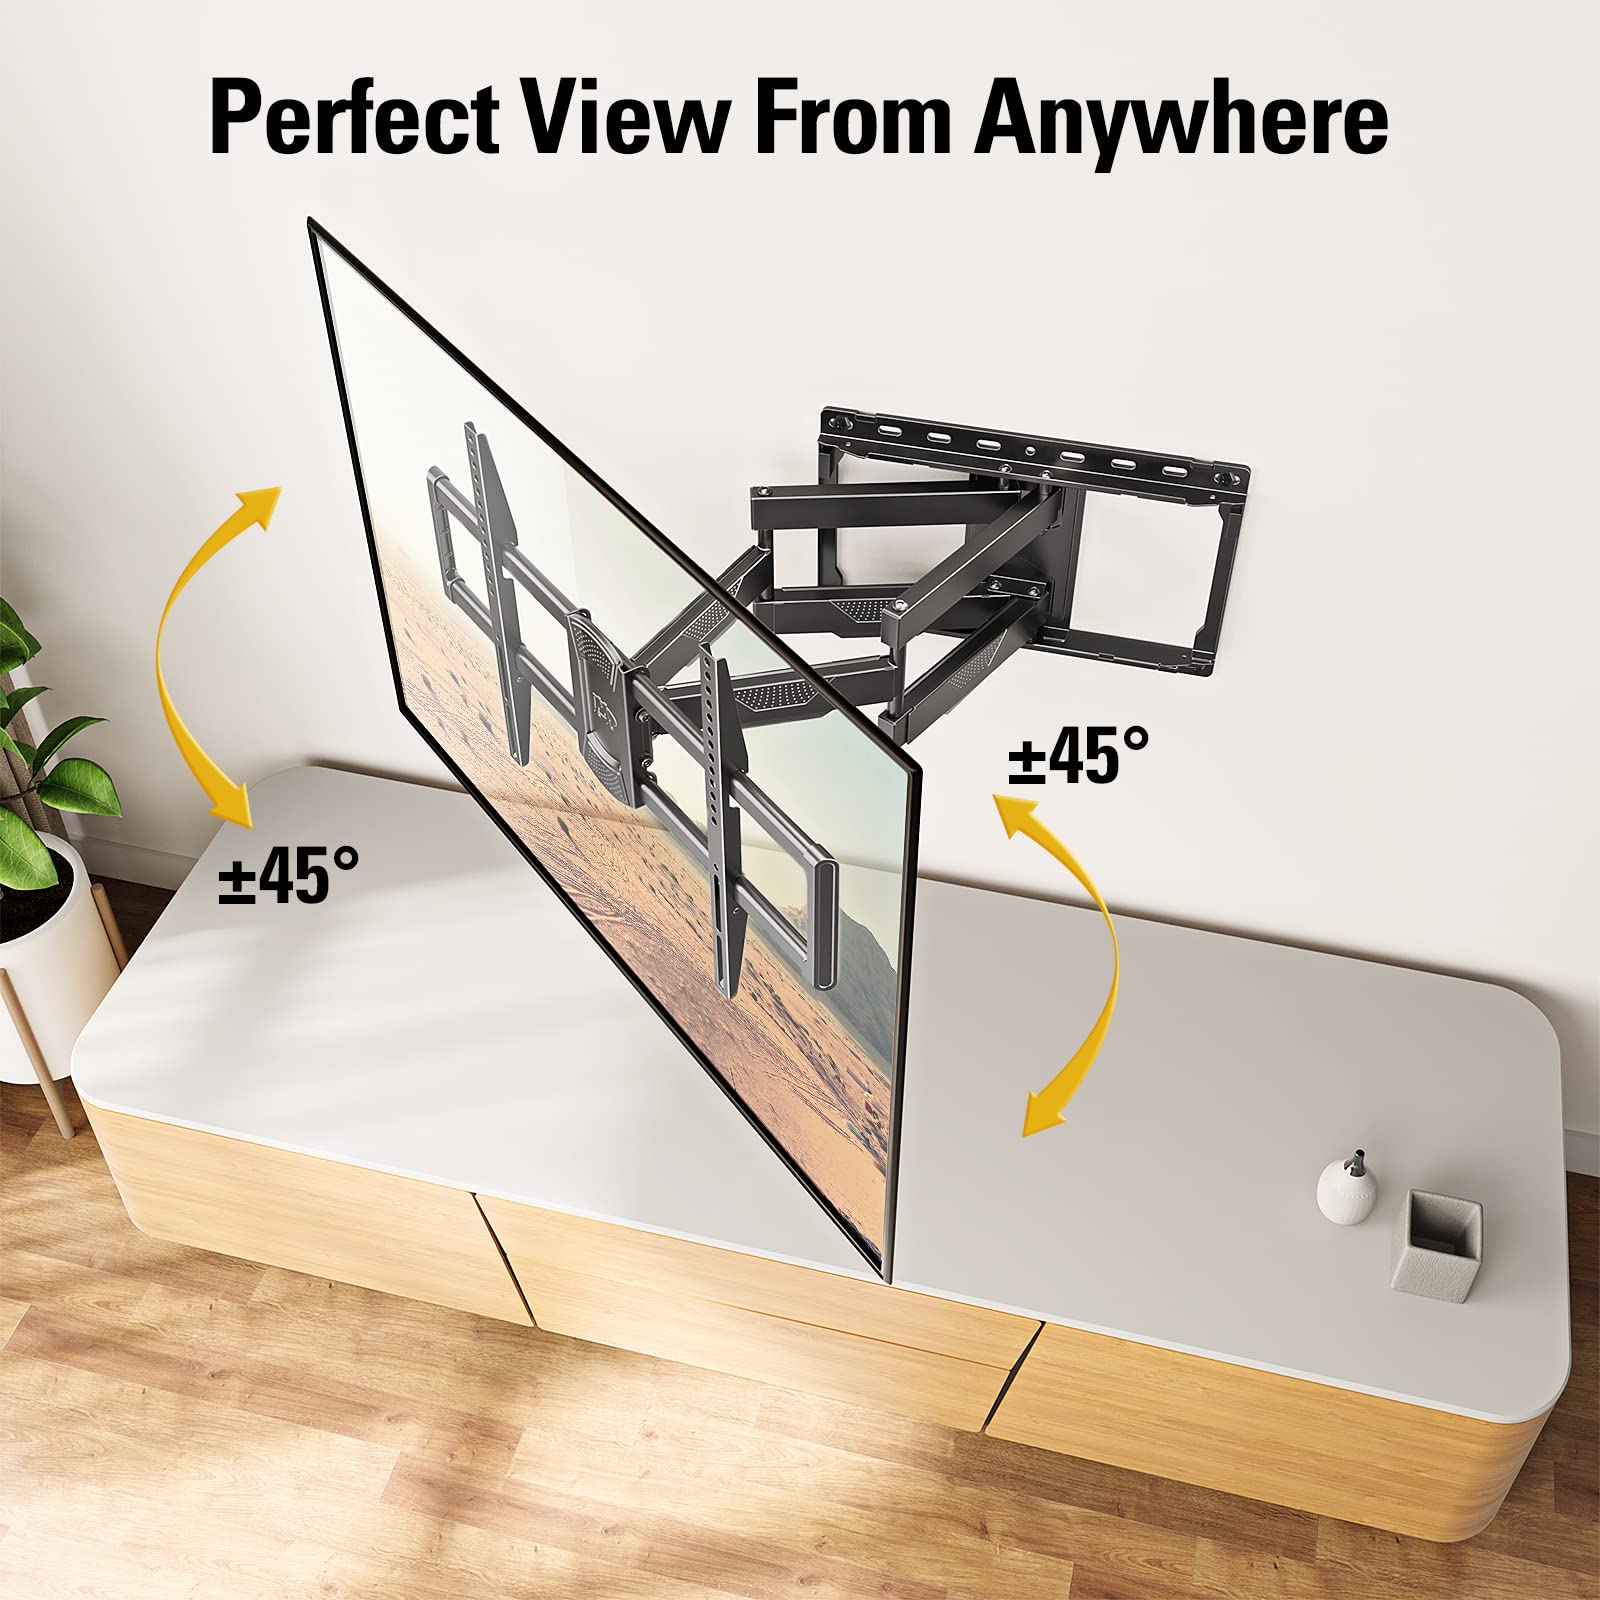 Mounting Dream Full Motion TV Wall Mount and Soundbar Bracket Bundle,TV Wall Mount with Sliding Design Max VESA 600x400mm and 100 LBS, Sound Bar Mount for Mounting Above or Under TV Up to 22 LBS